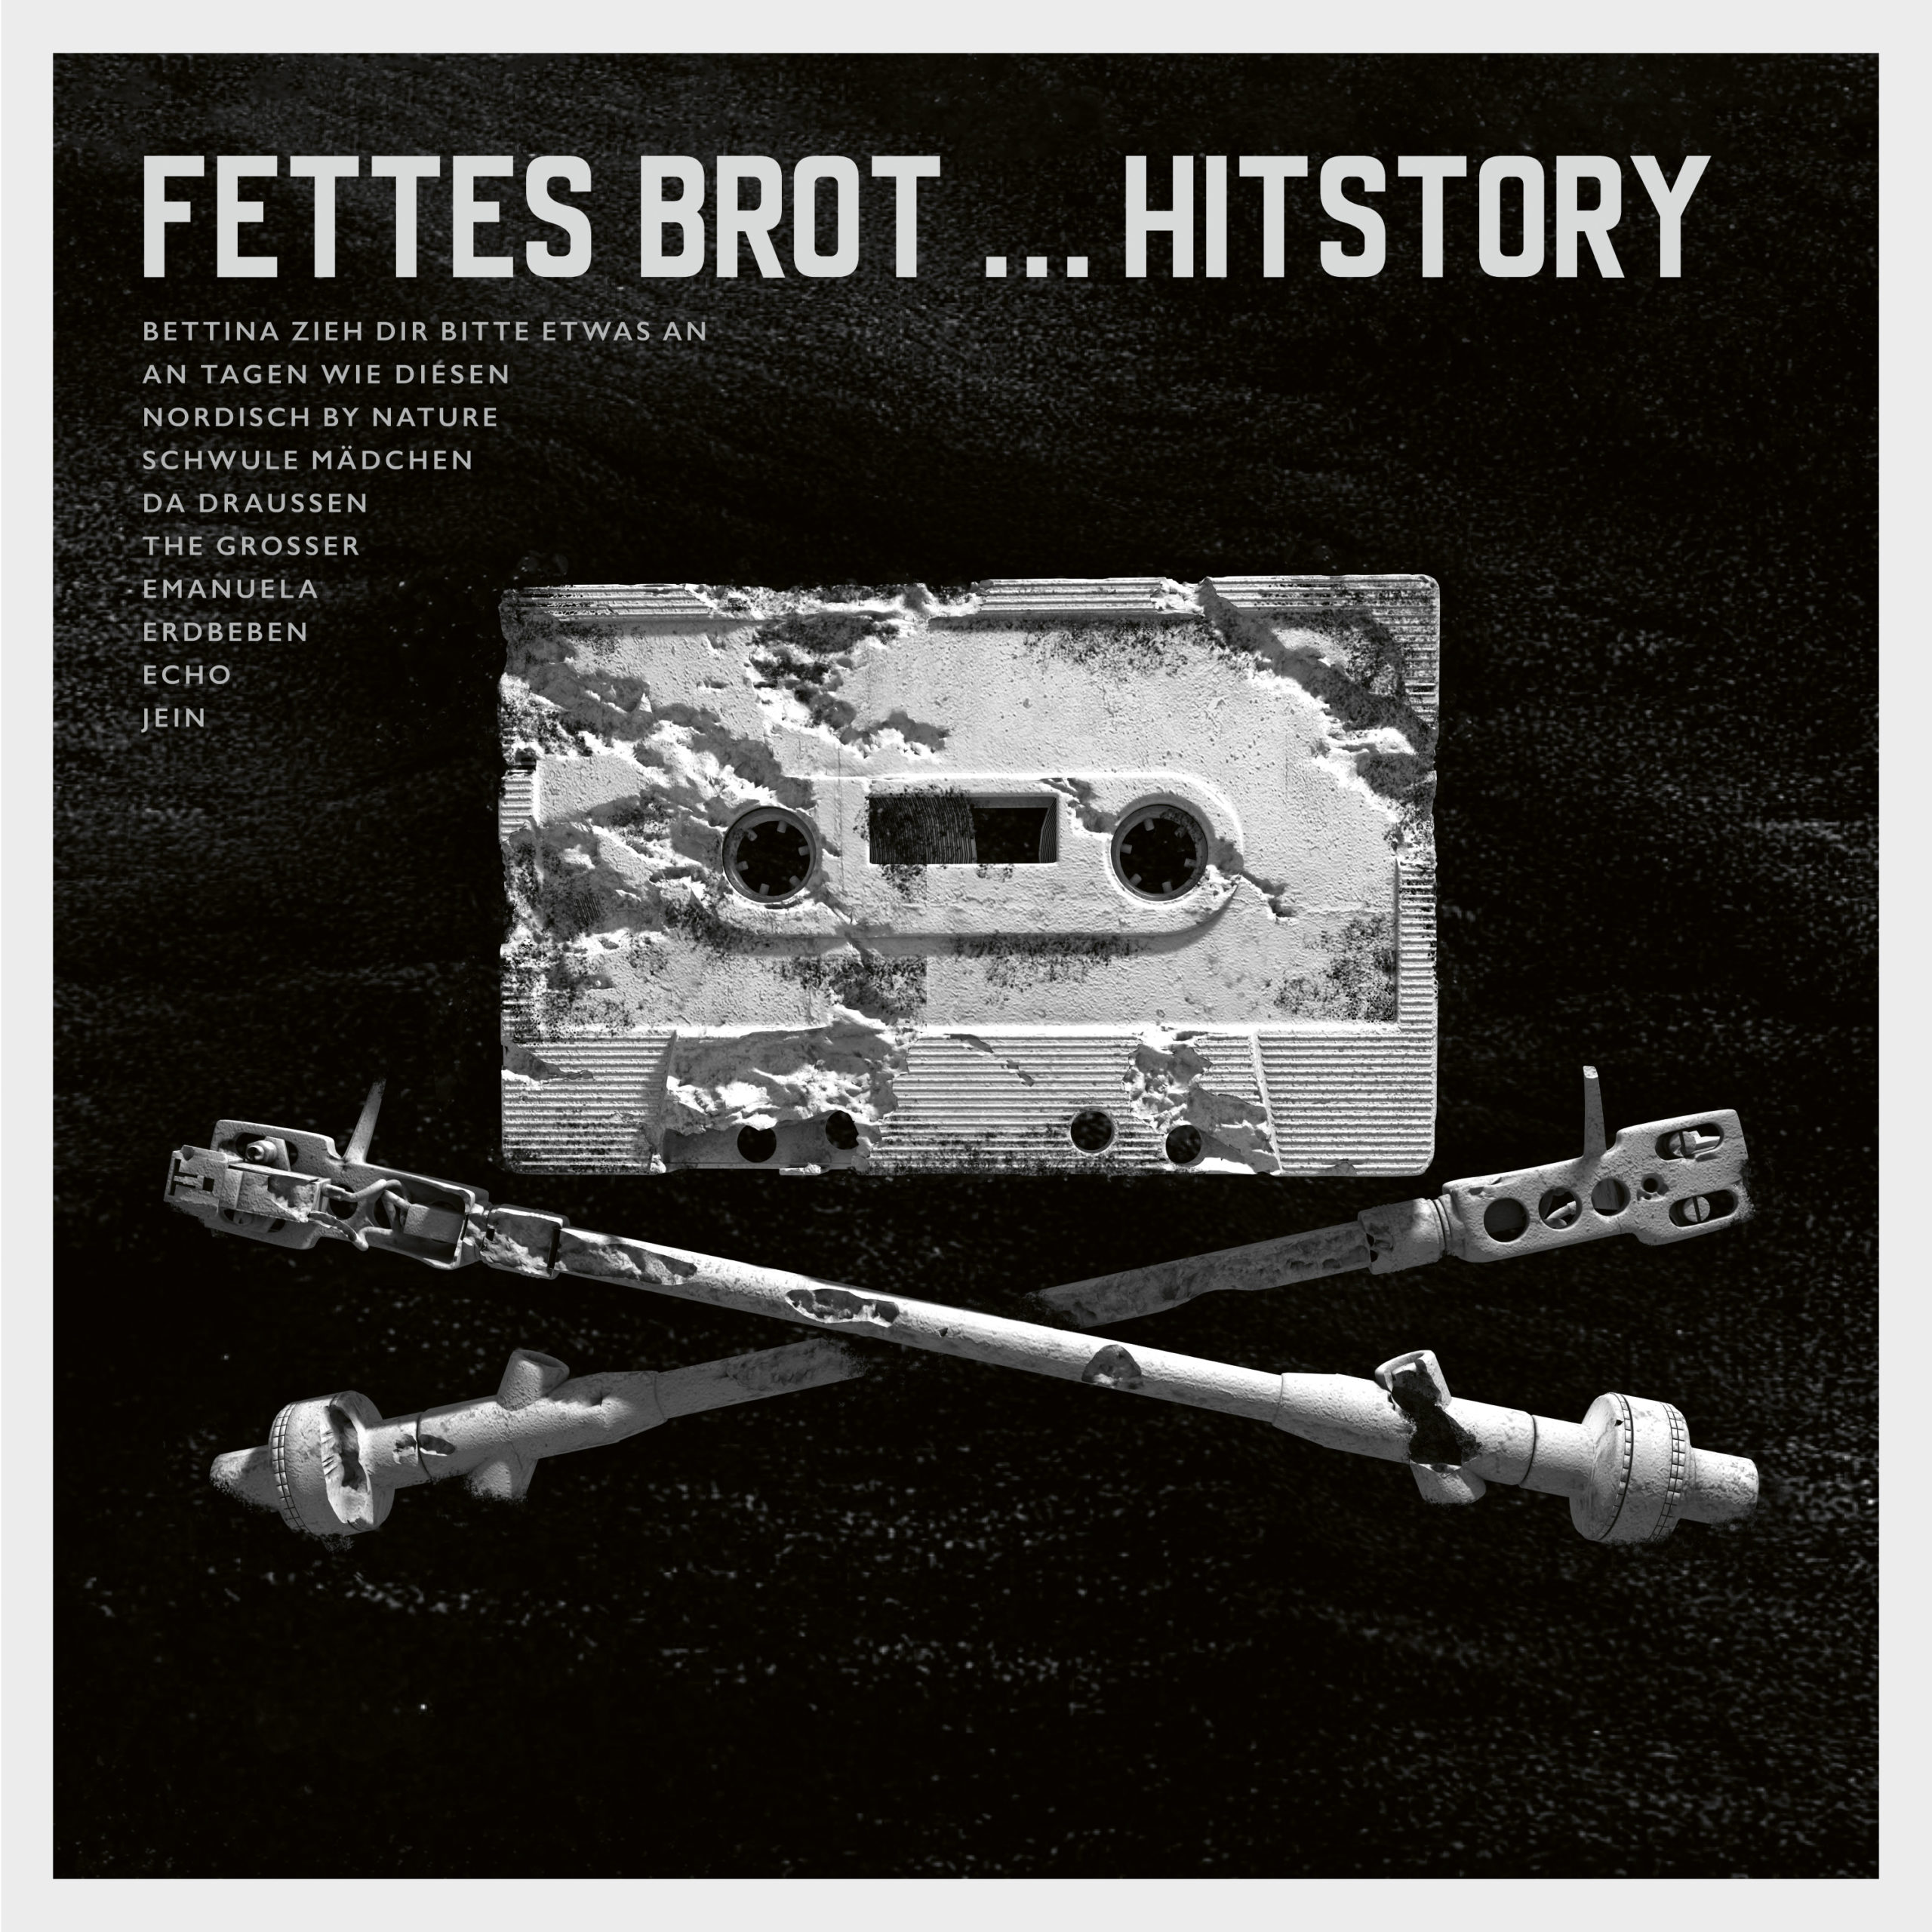 FETTES BROT Cover Hitstory 3000px RGB 1 scaled